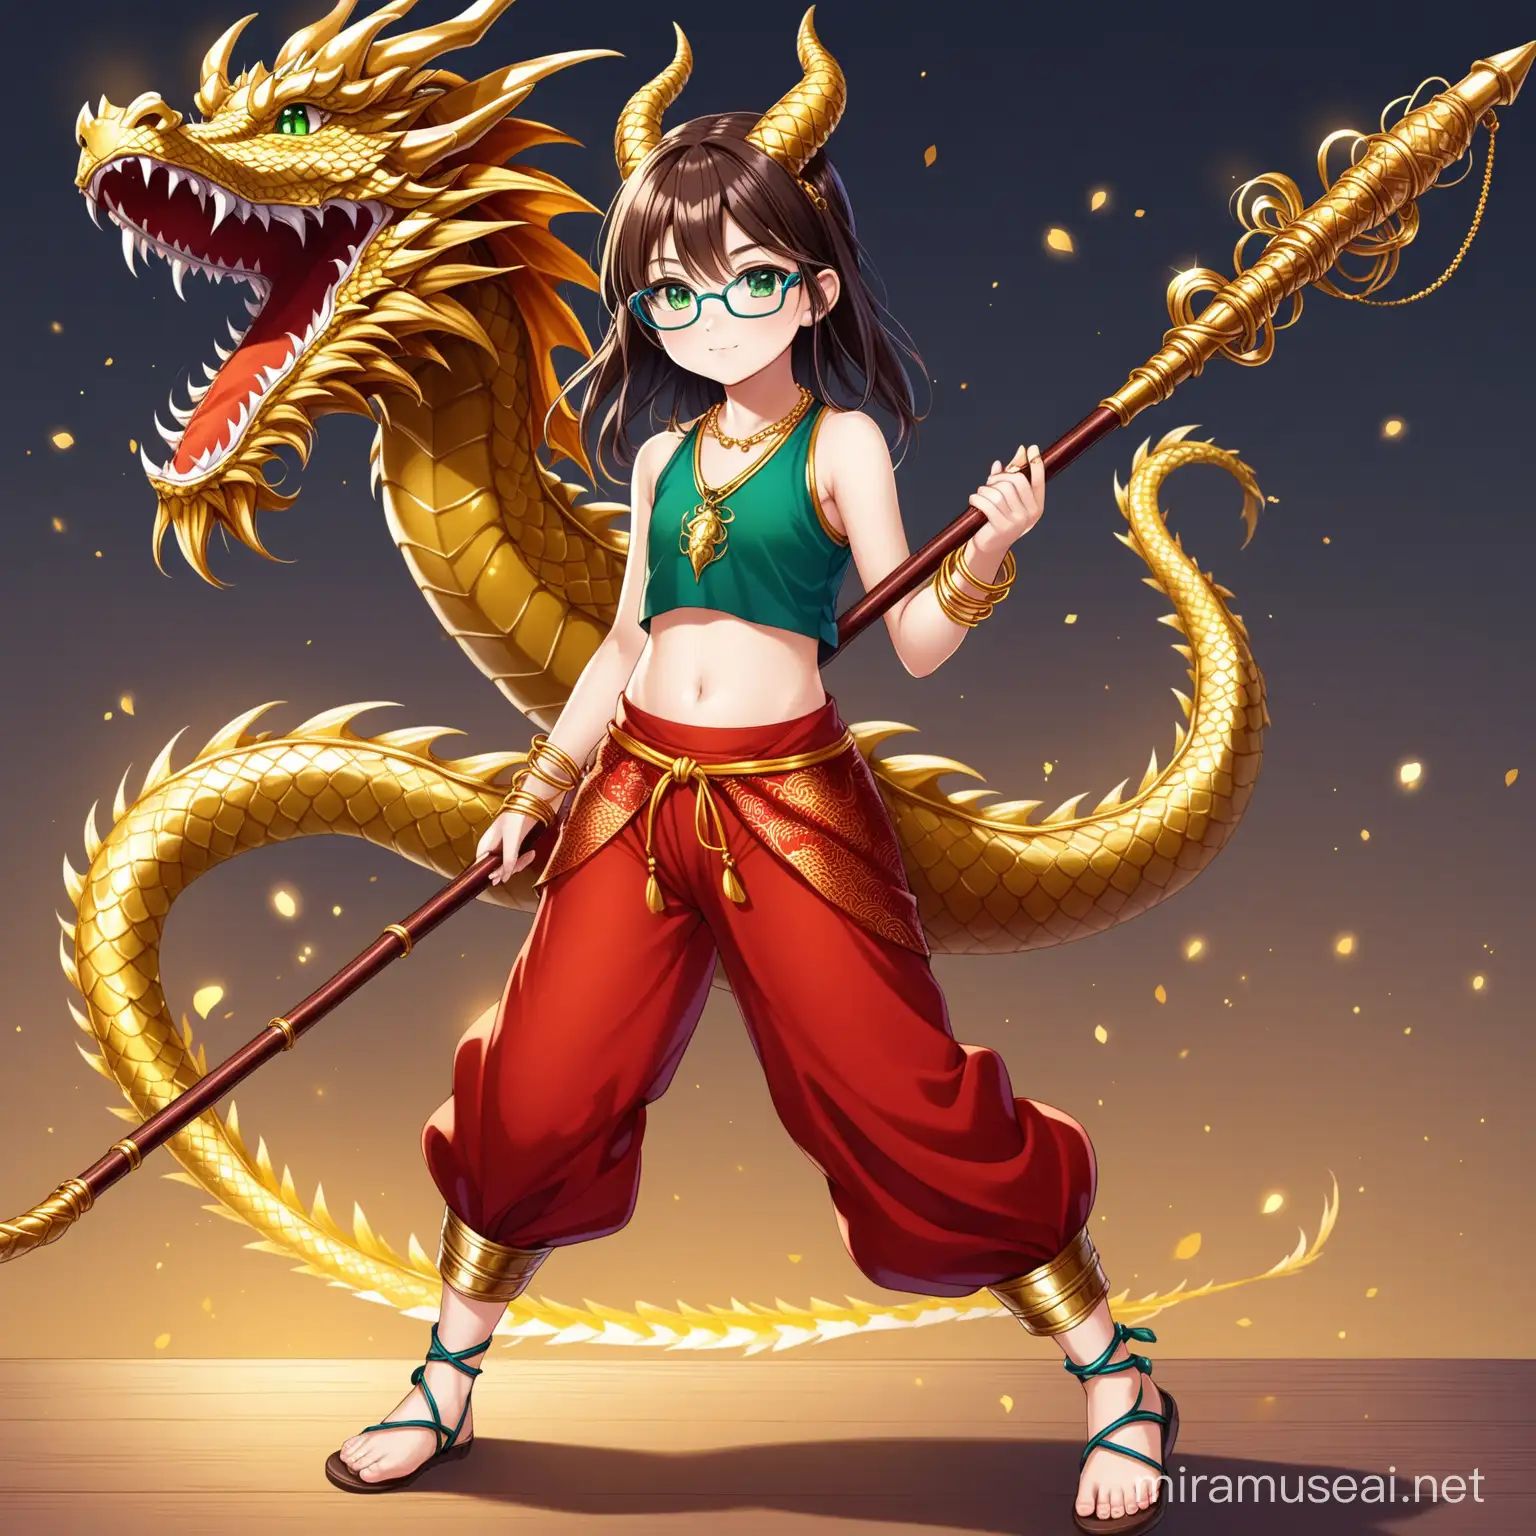 Young Girl with Dragon Accessories and Wooden Staff